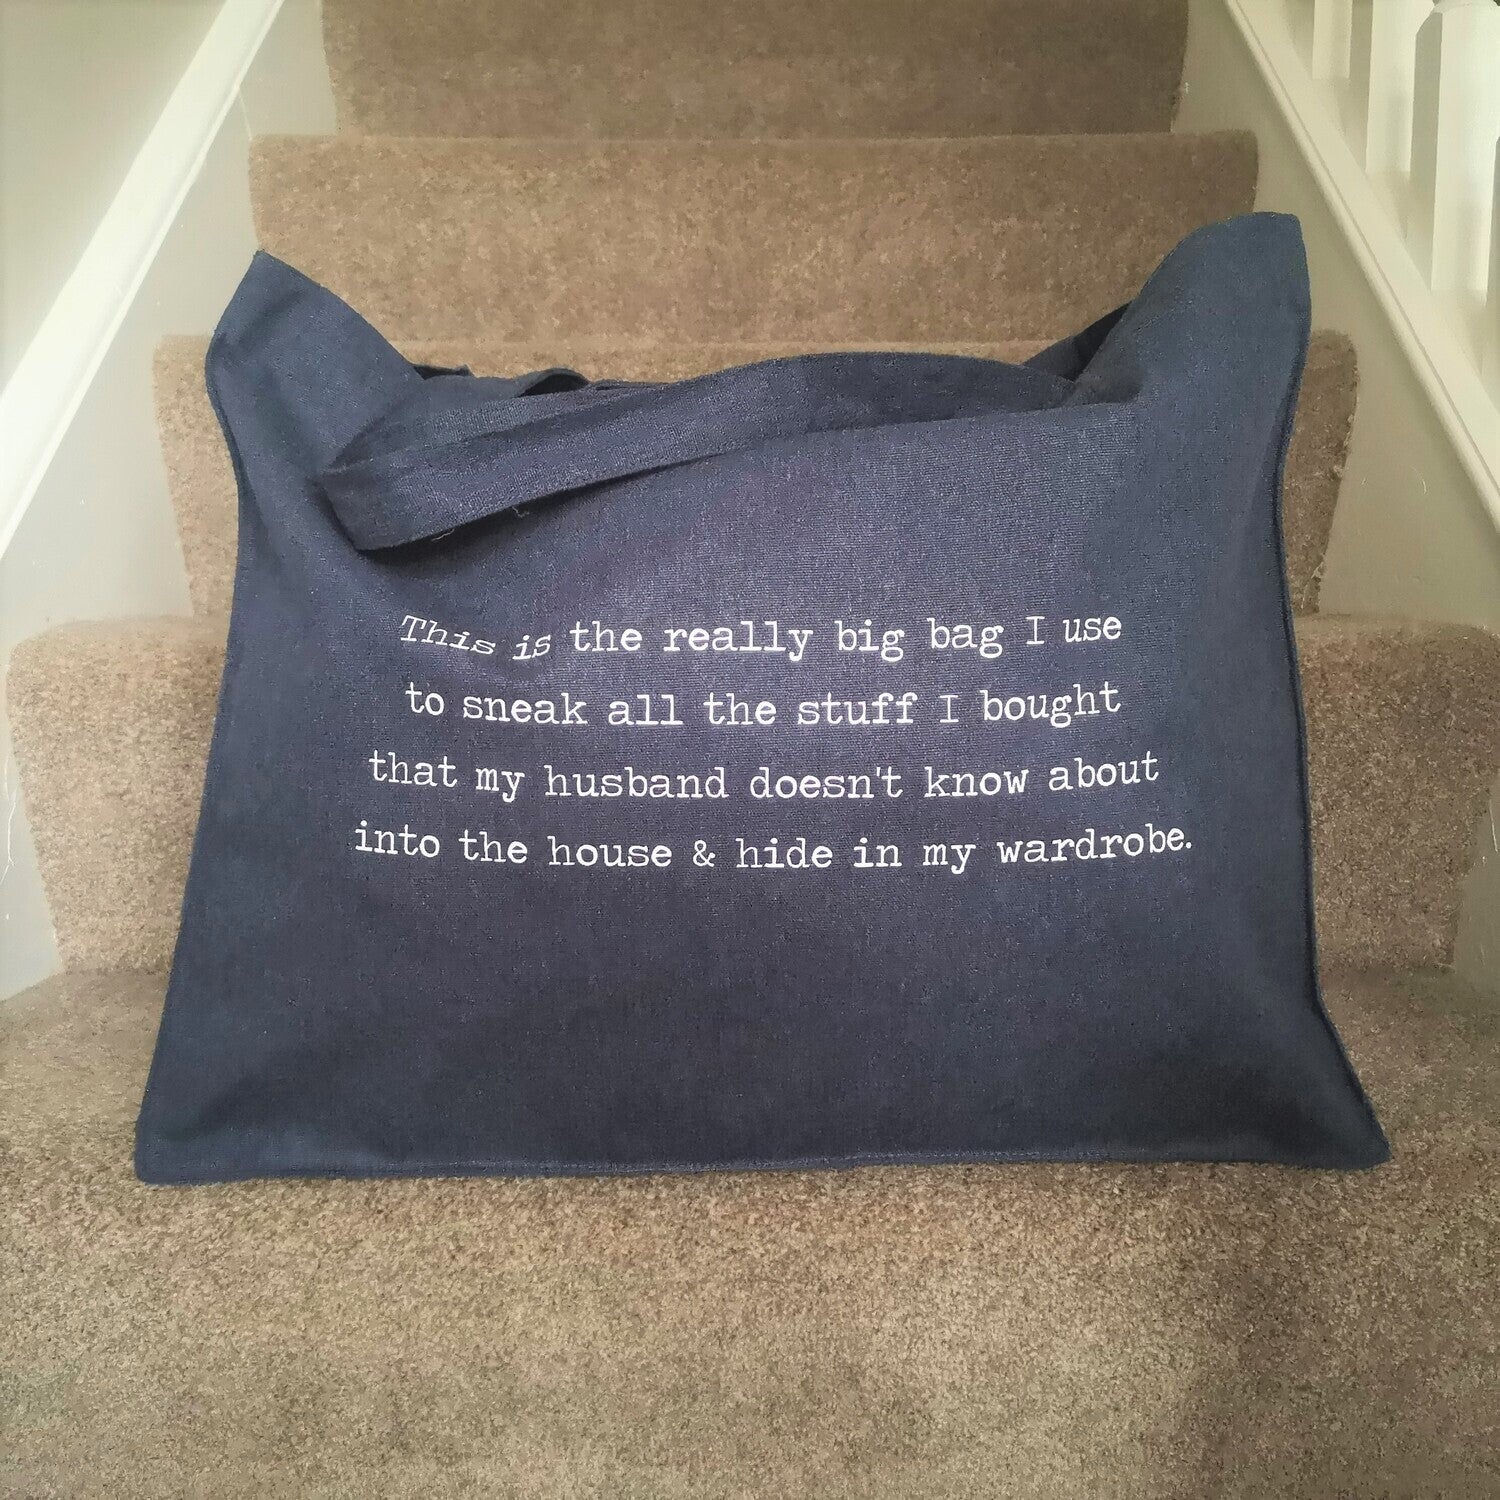 A large midnight blue organic cotton tote with the following text on it - This is the really big bag I use to sneak all the stuff I bought that my husband doesn't know about into the house & hide in my wardrobe.